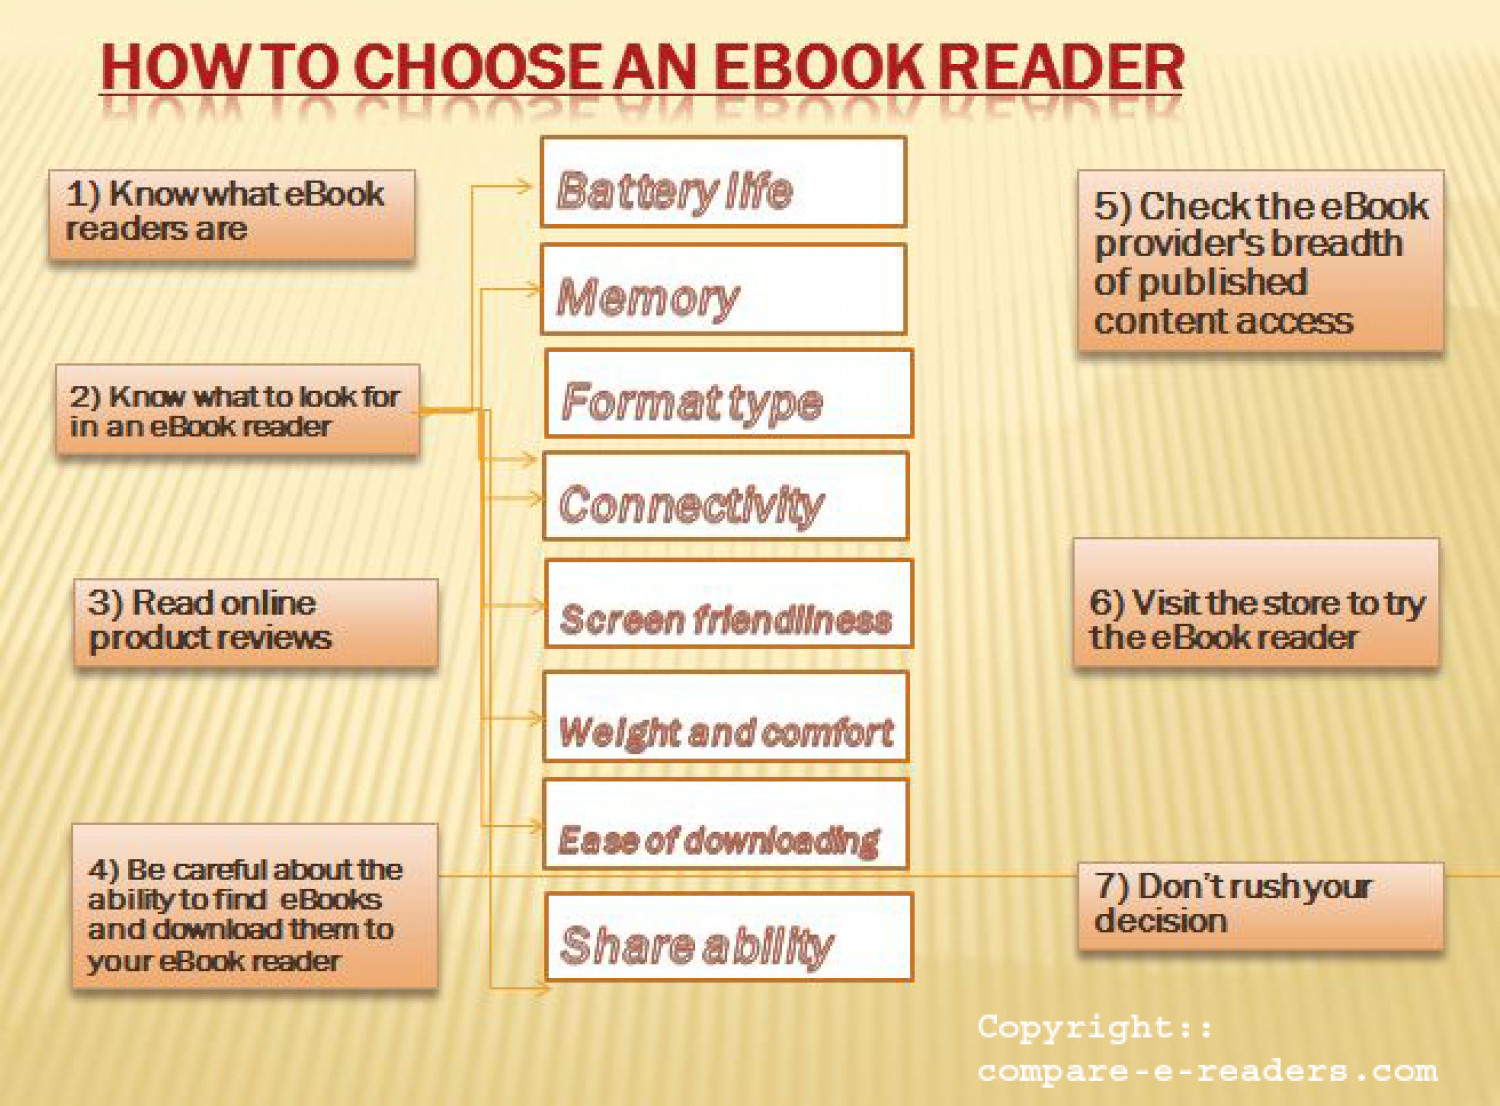 How To Choose an eBook Reader?? Infographic